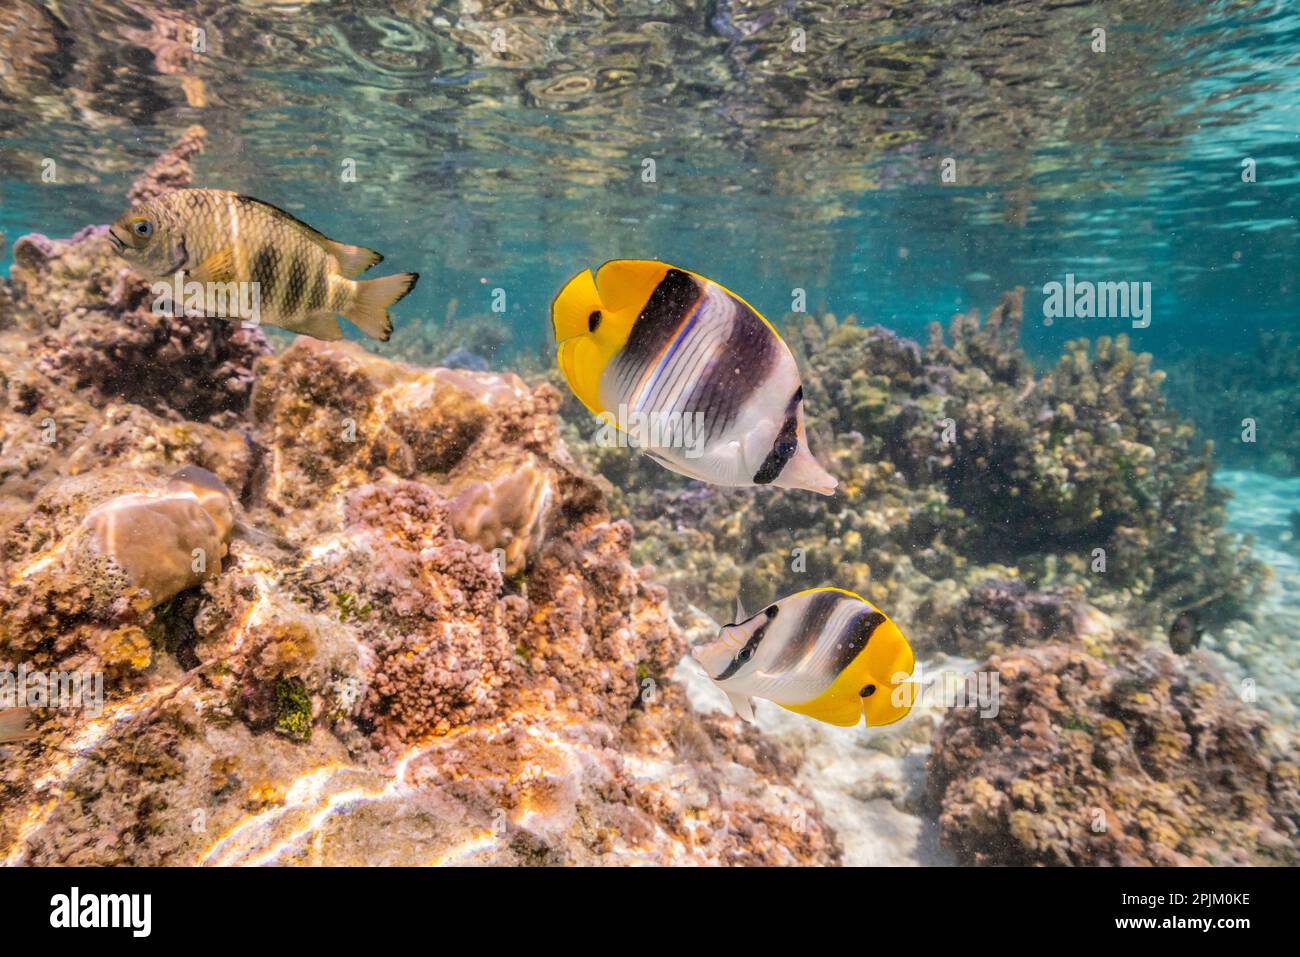 French Polynesia, Taha'a. Coral scenic with Pacific double-saddle butterflyfish. Stock Photo